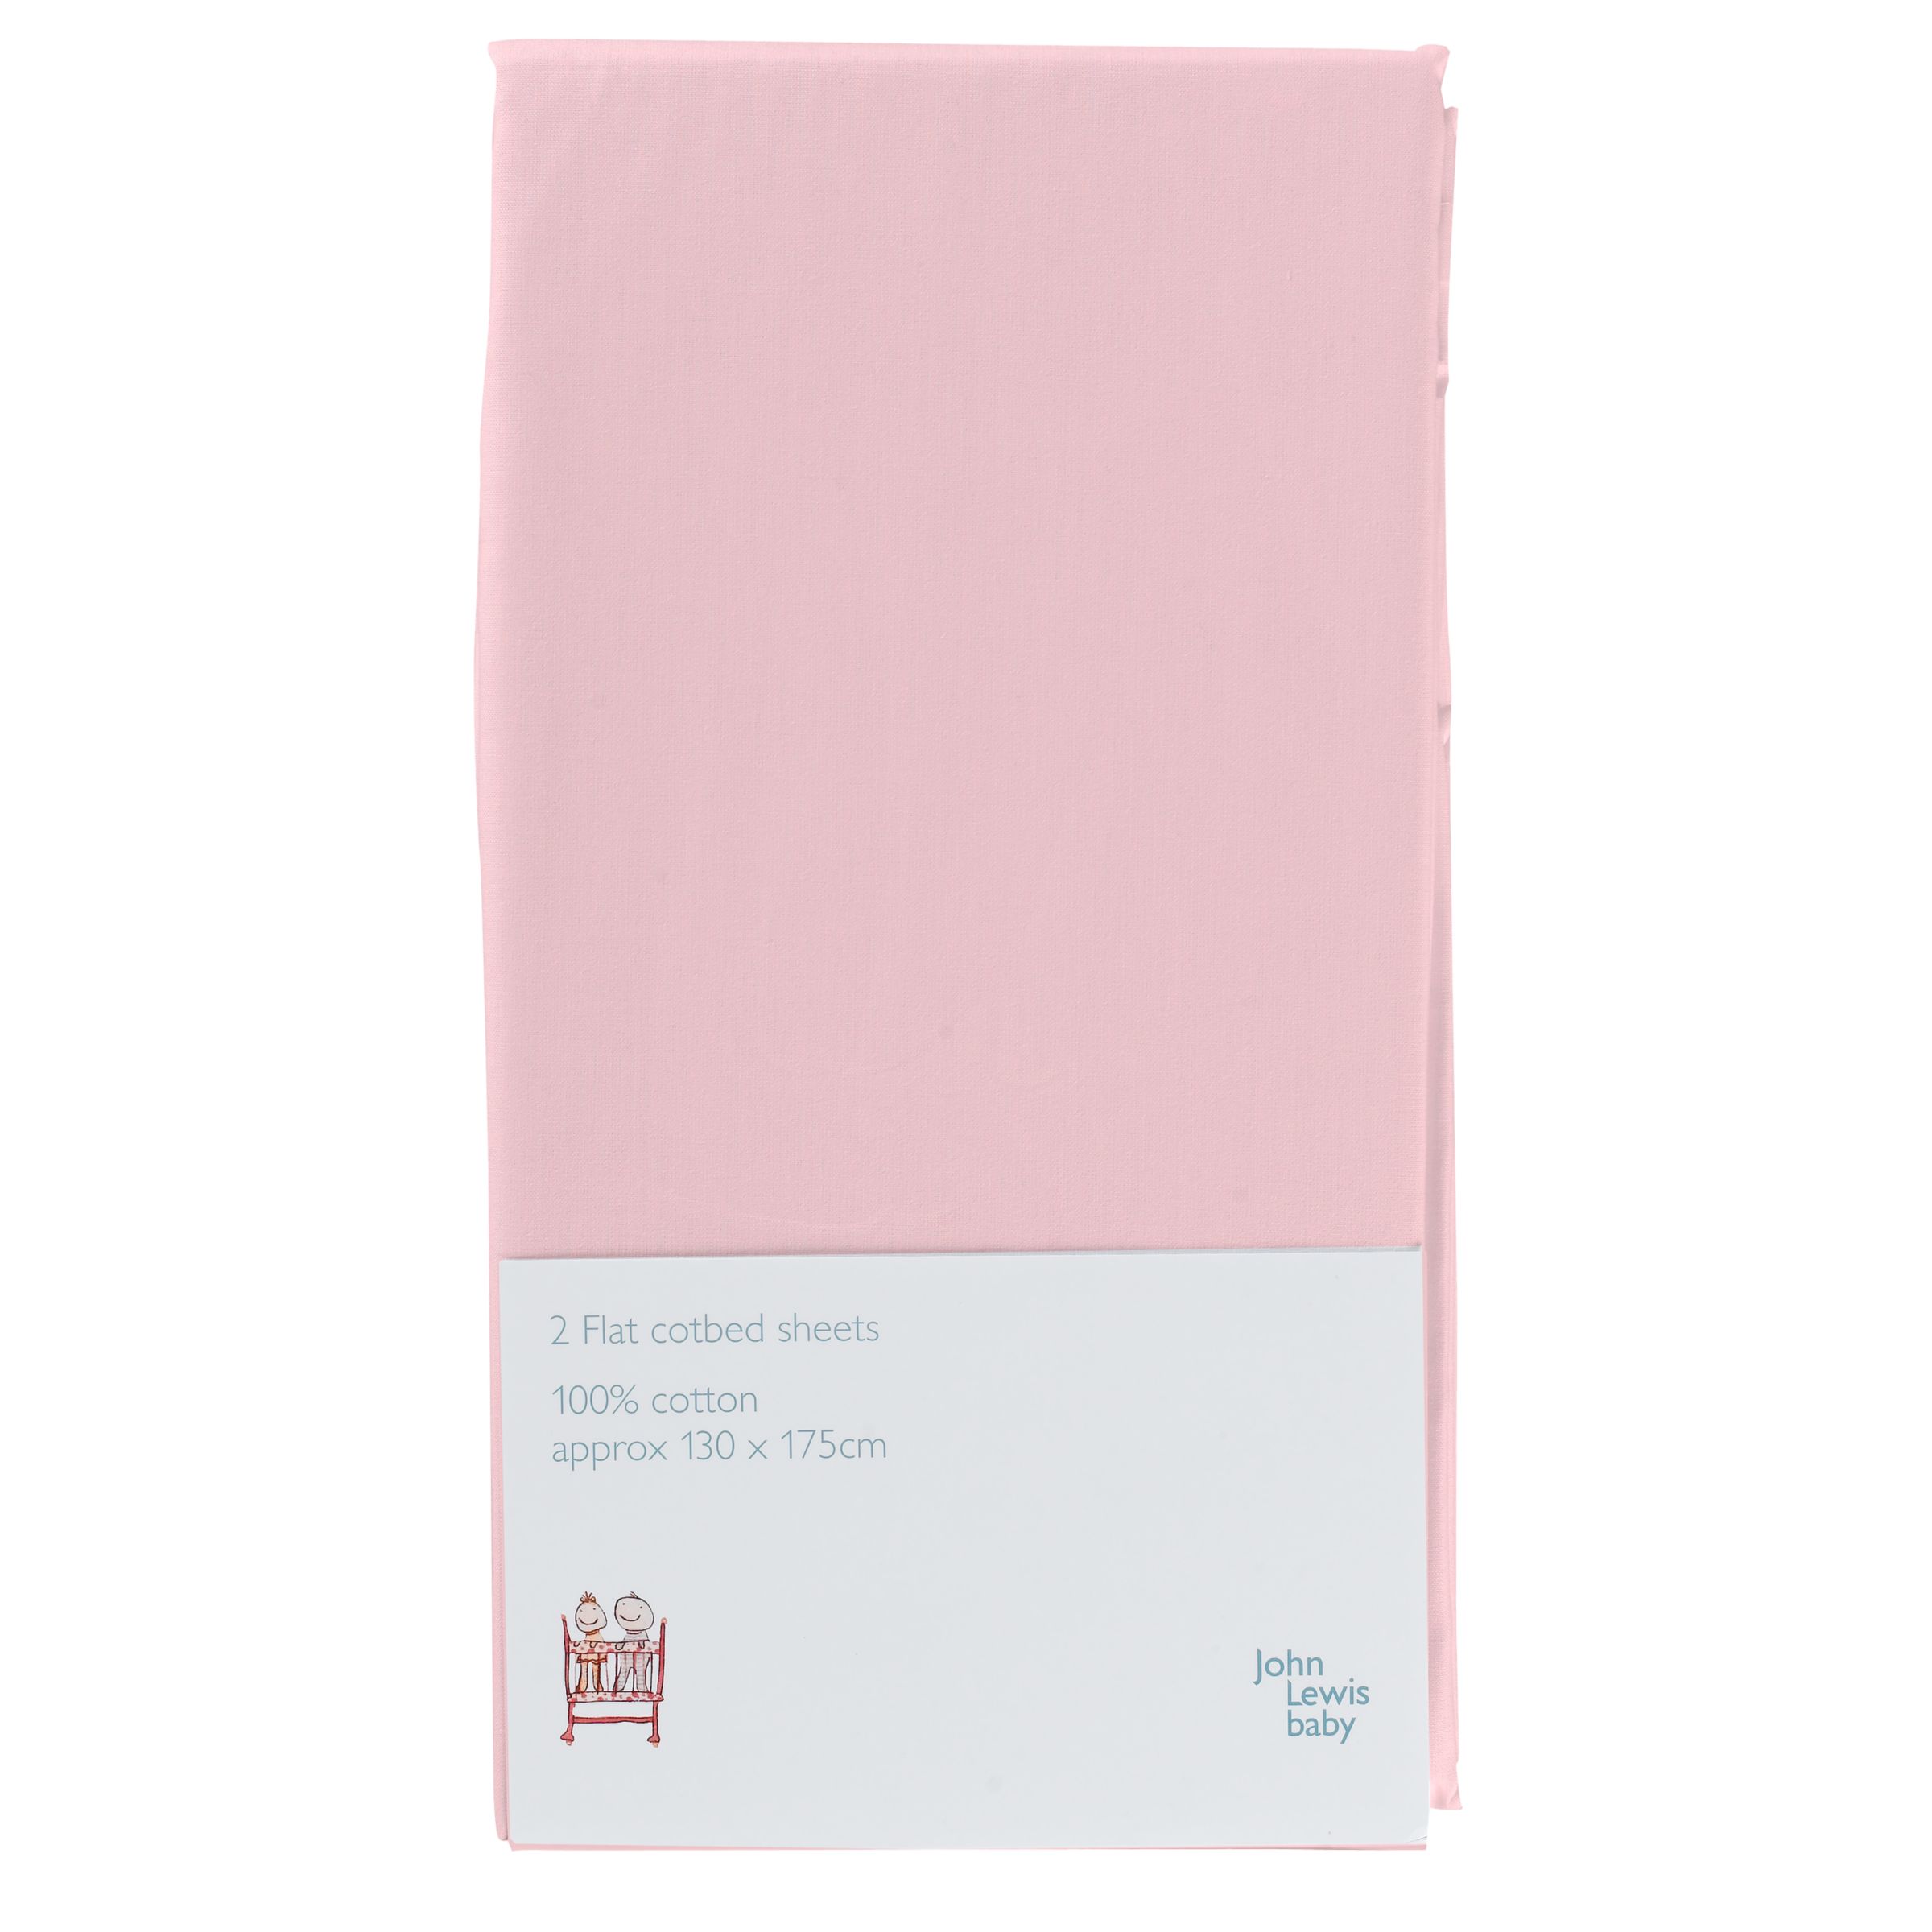 Flat Cotbed Sheet, Pack of 2, Pink